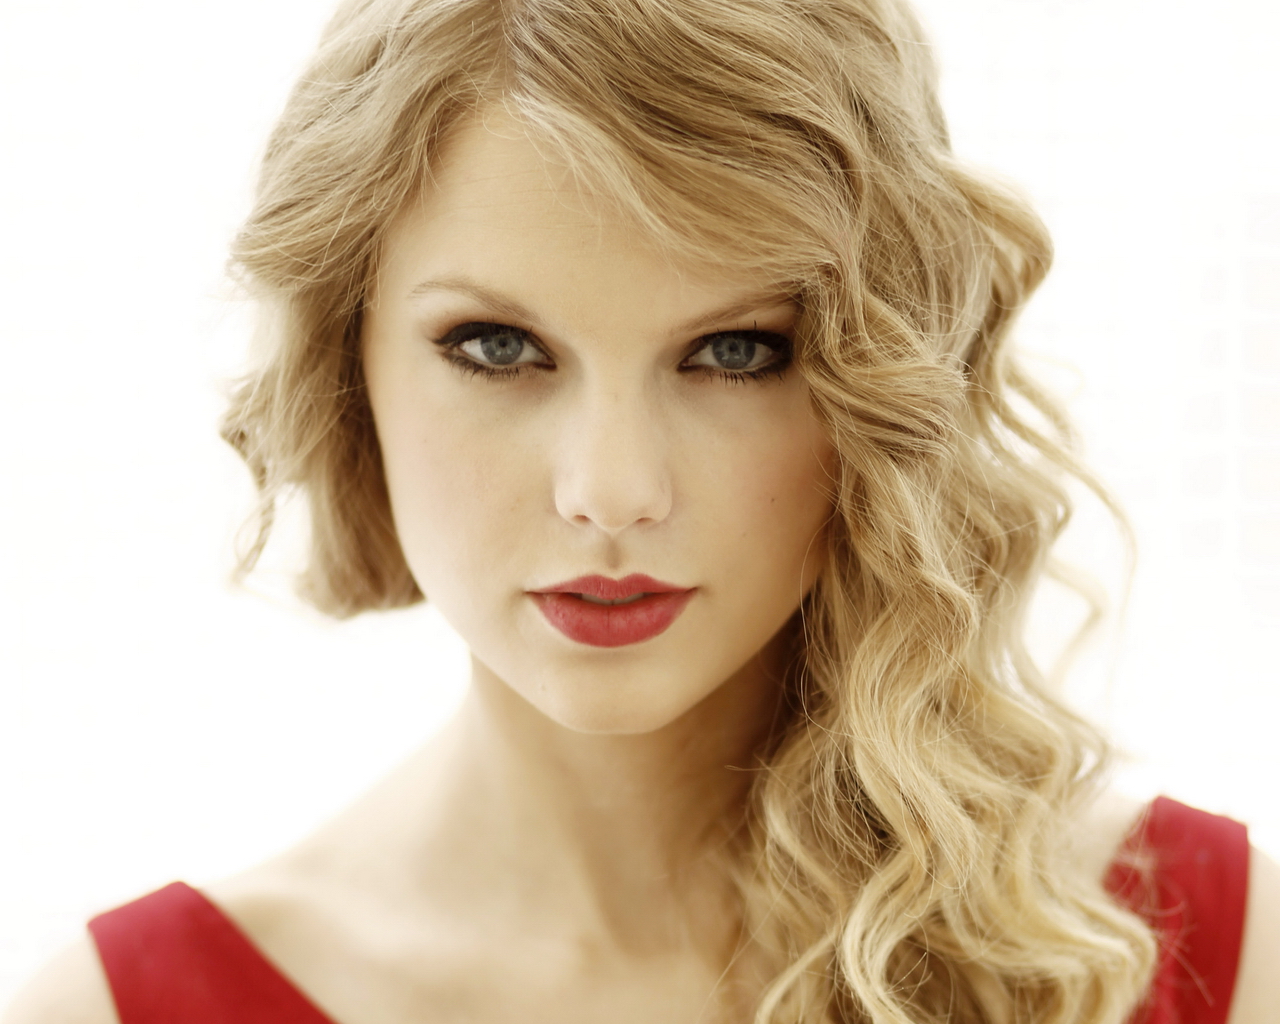 Musician Taylor Swift poses for a portrait in West Hollywood, Calif. on Wednesday, Sept. 22, 2010. Swift's new album 